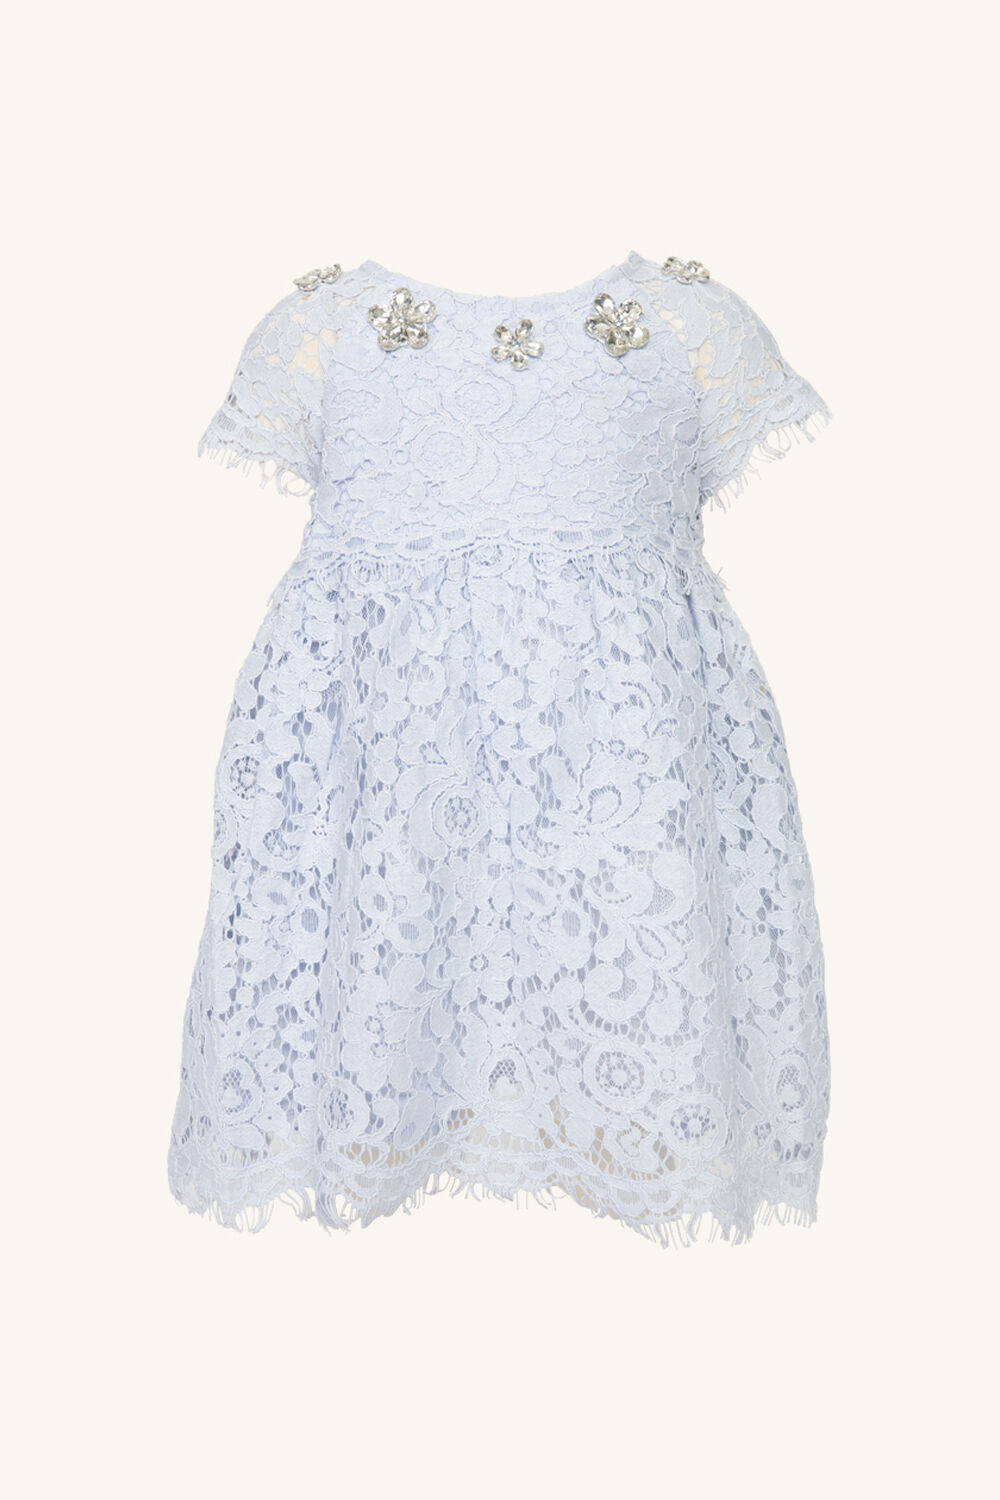 Baby girl MAISIE LACE DRESS in colour ARCTIC ICE